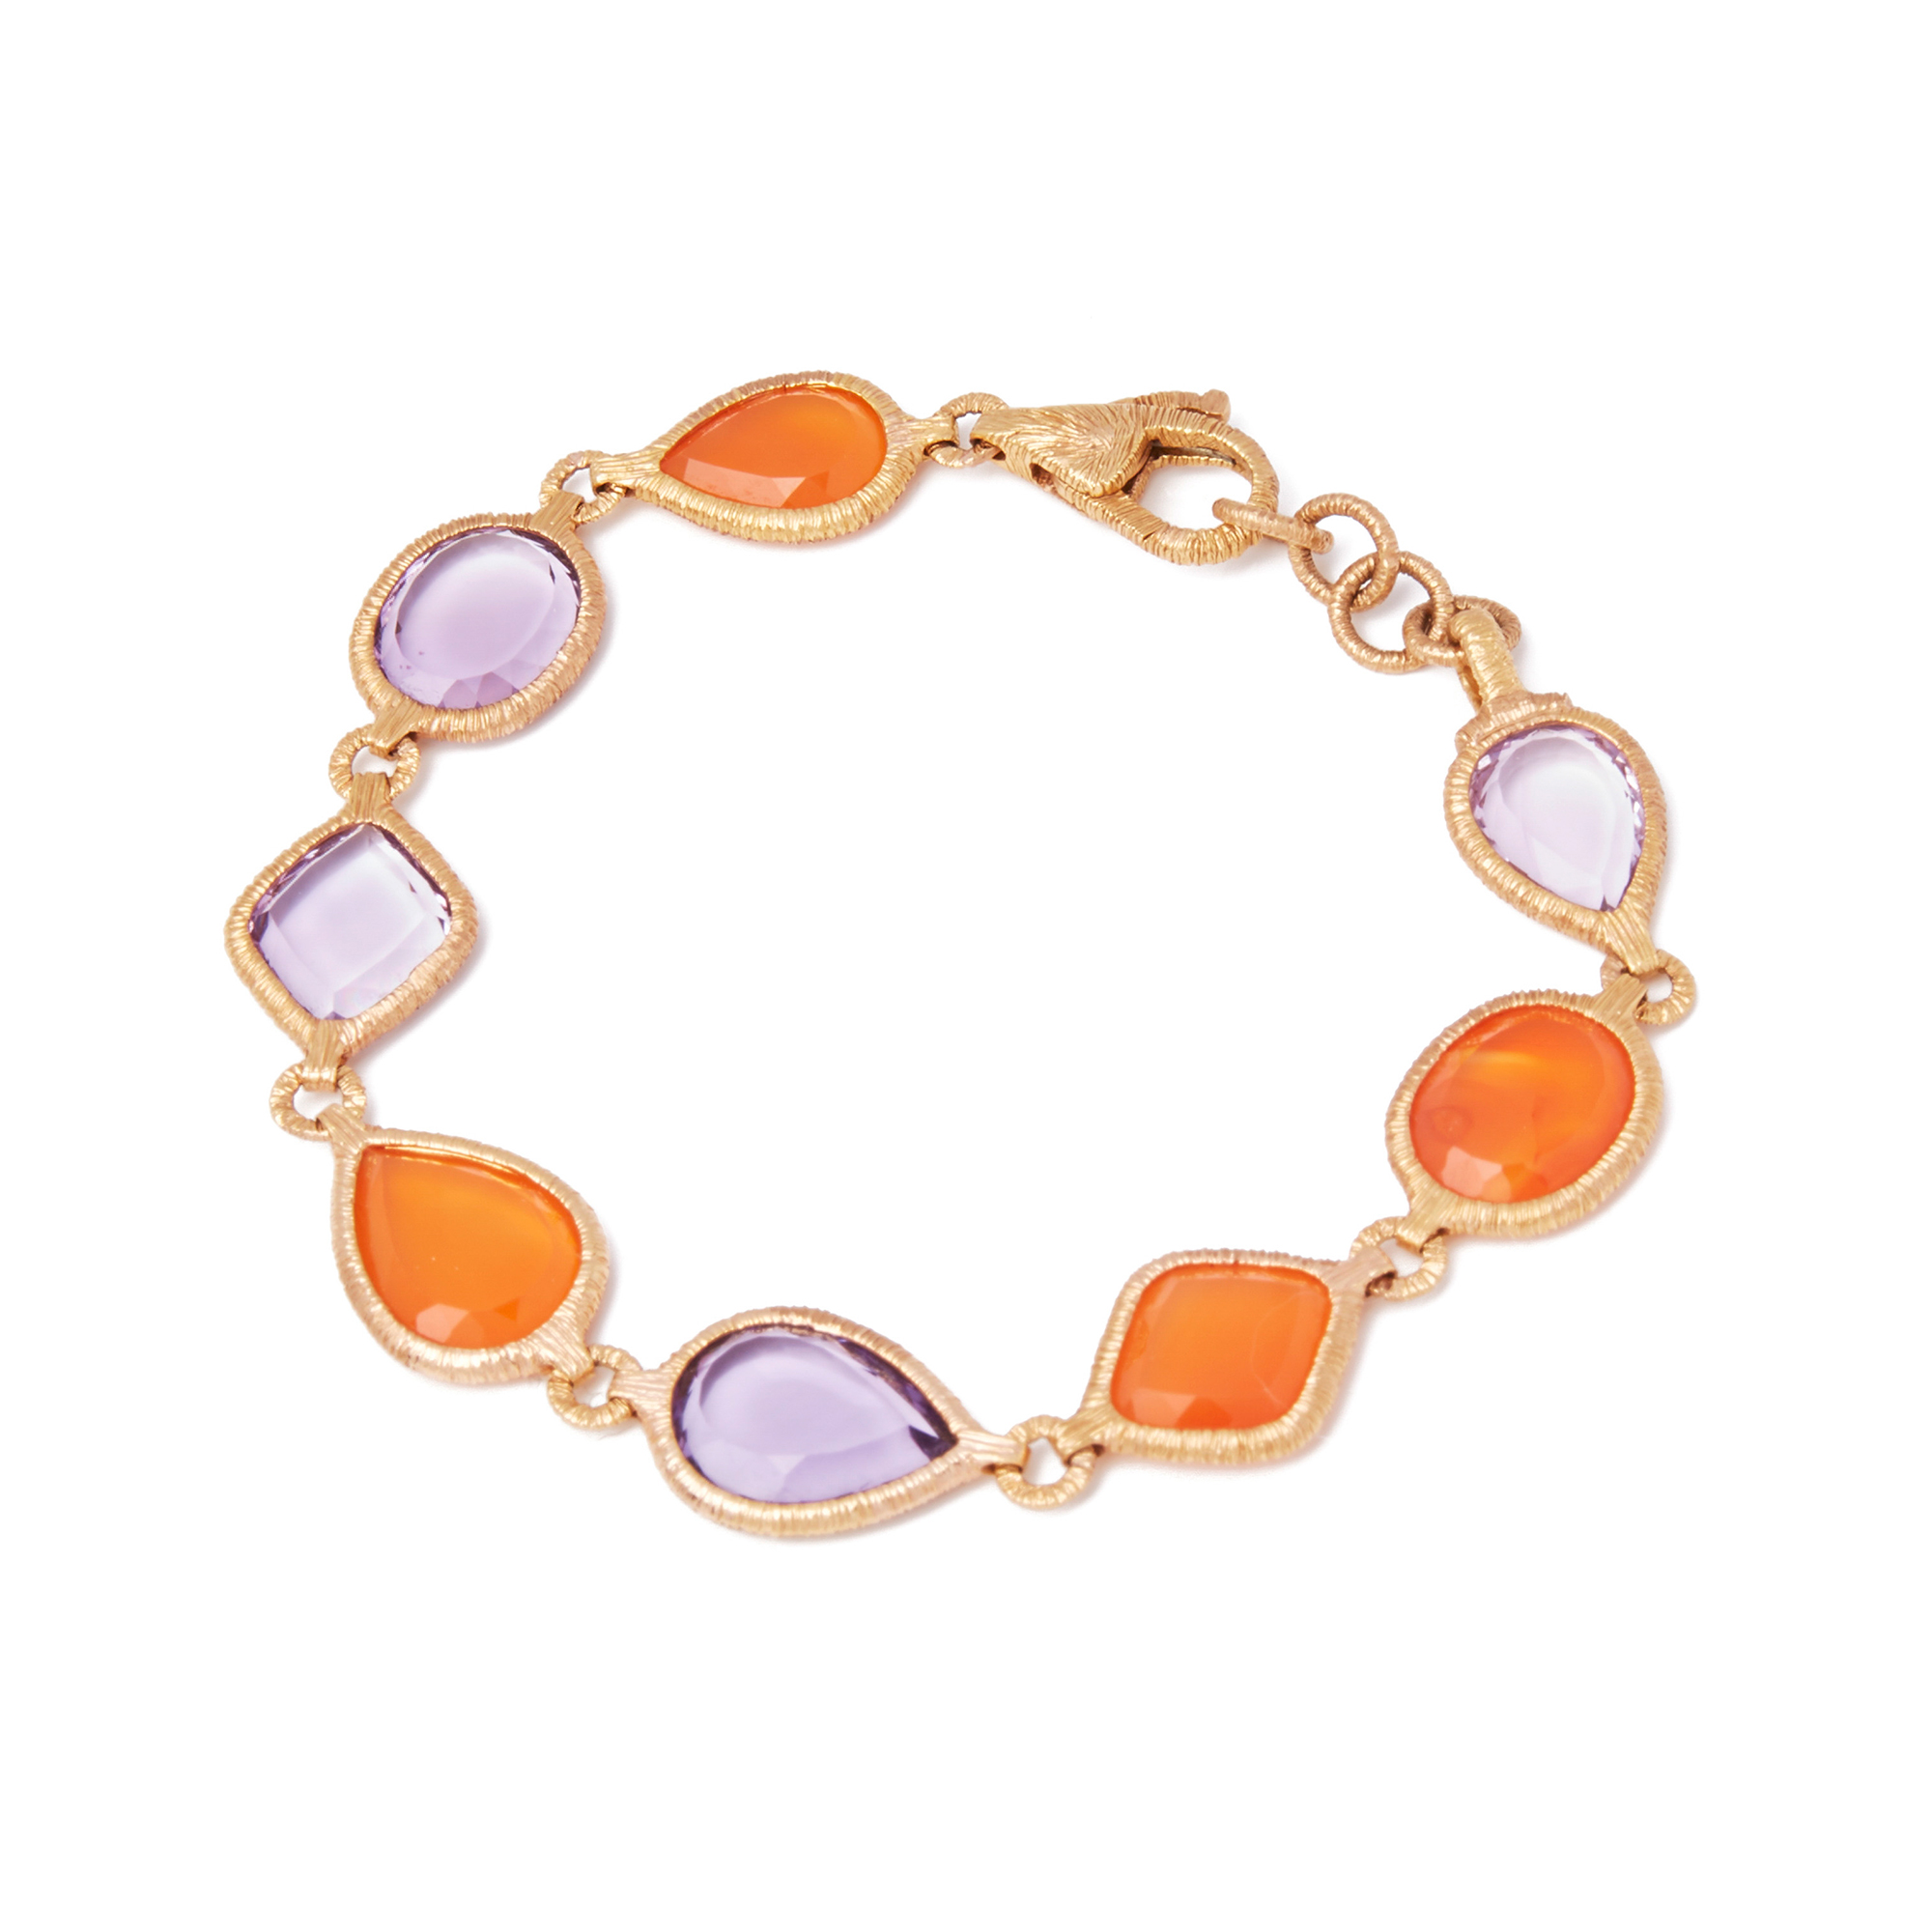 Unbranded 18ct Yellow Gold Carnelian and Amethyst Bracelet